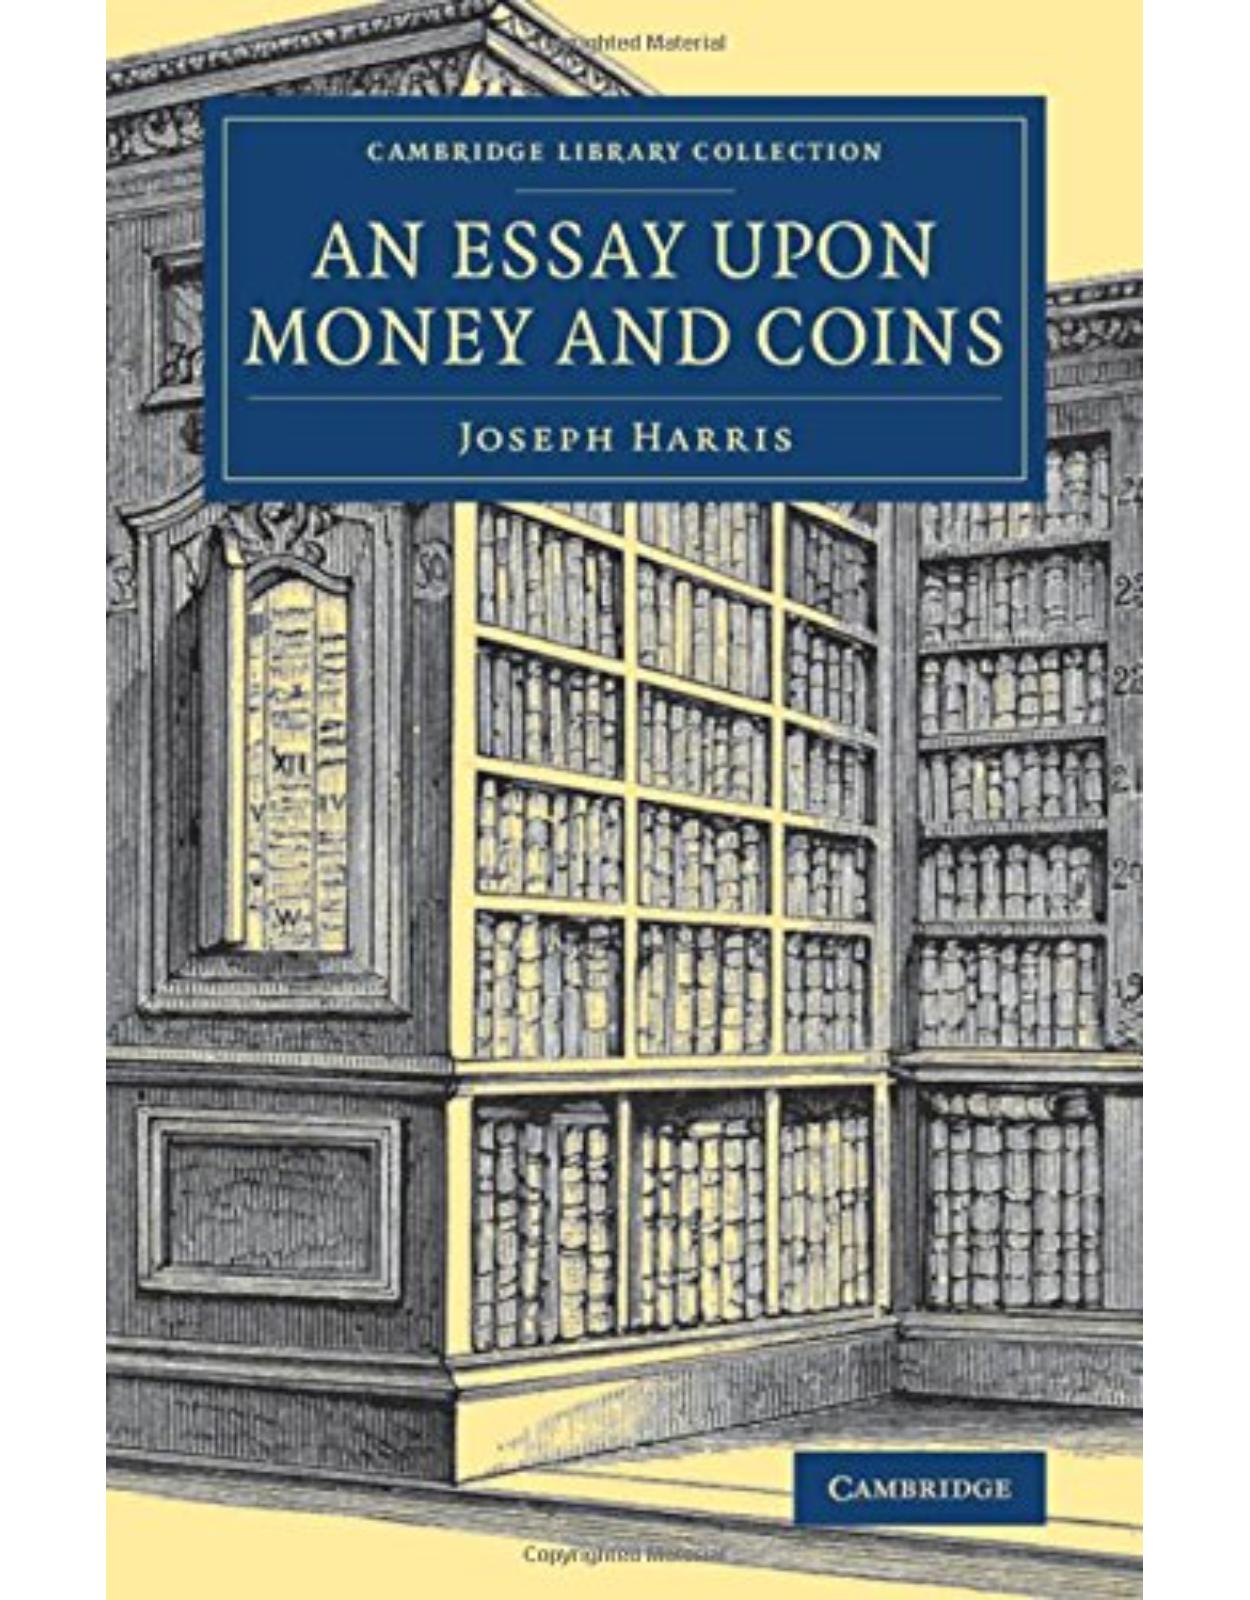 An Essay upon Money and Coins (Cambridge Library Collection - British & Irish History, 17th & 18th Centuries)